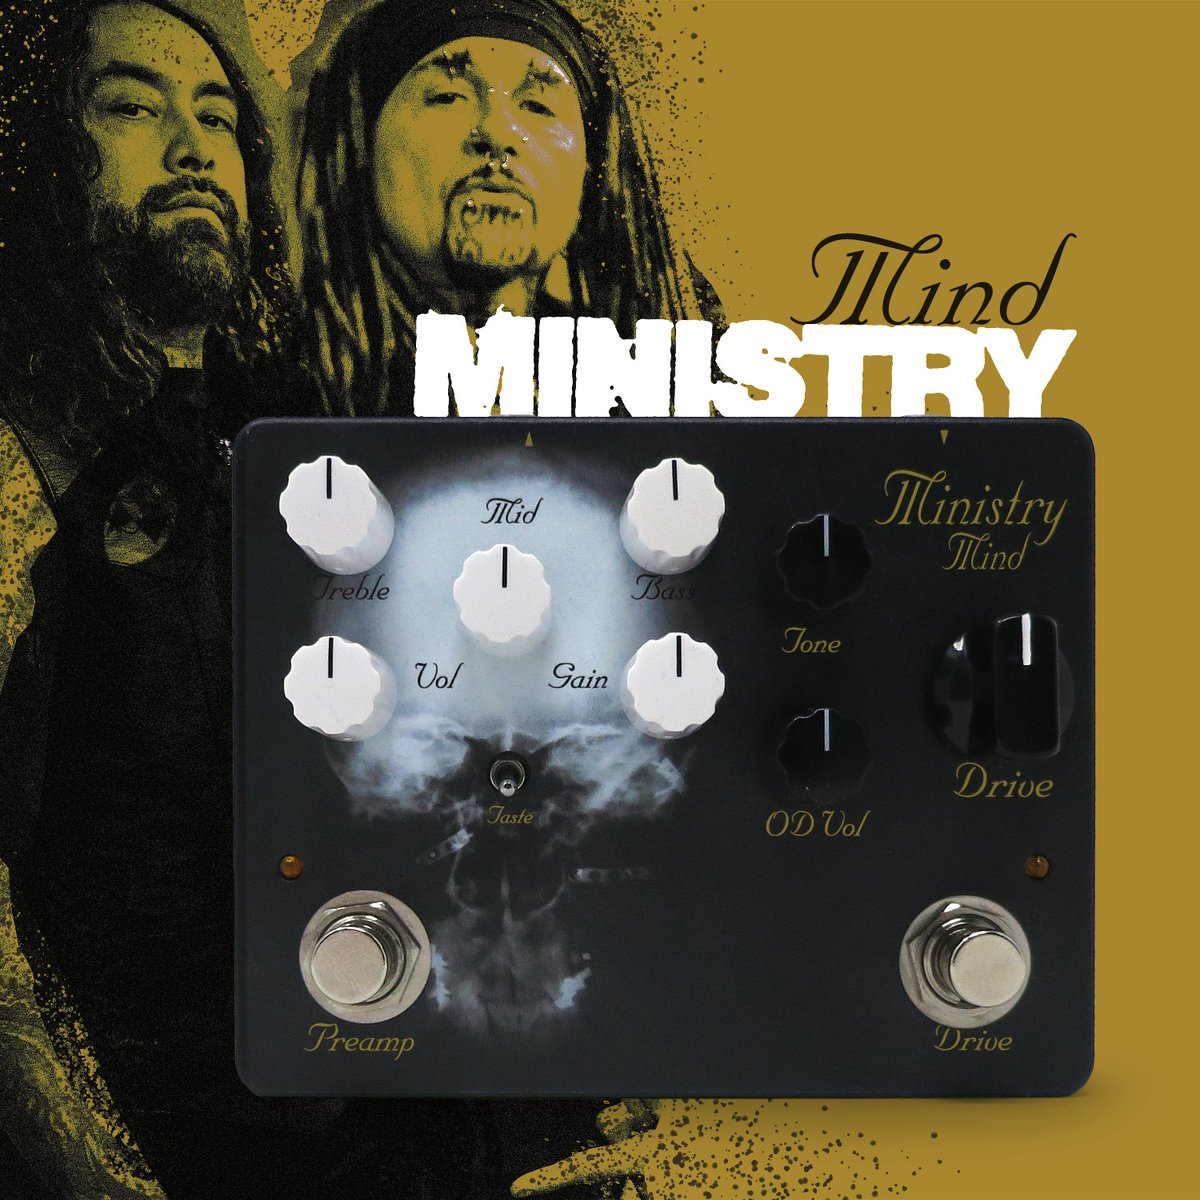 Order Now: ministrypedal.com
LIMITED custom Ministry pedal. 1+ year to create & hone to perfection to give you sound of our seminal record. Stage-ready, high-end audio gear. Ships w/Certificate SIGNED by Al! #ministryband #aljourgensen #cesarsoto #ministrypedal